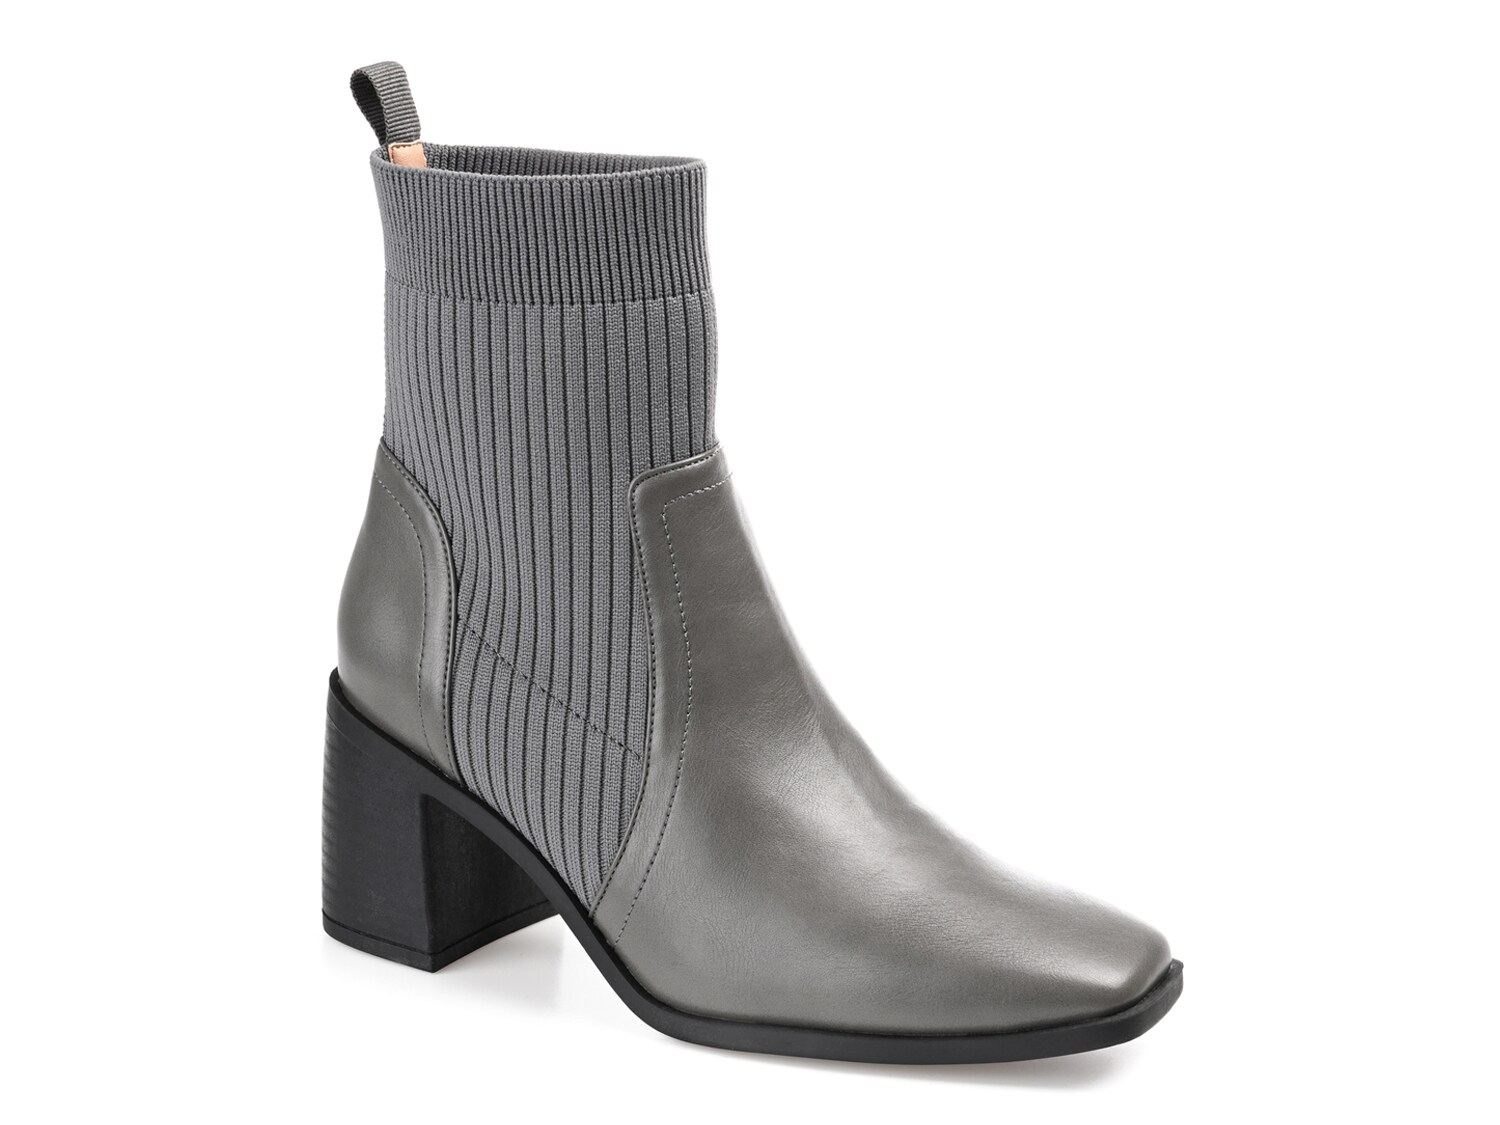 Journee Collection Markita Bootie - Free Shipping | DSW